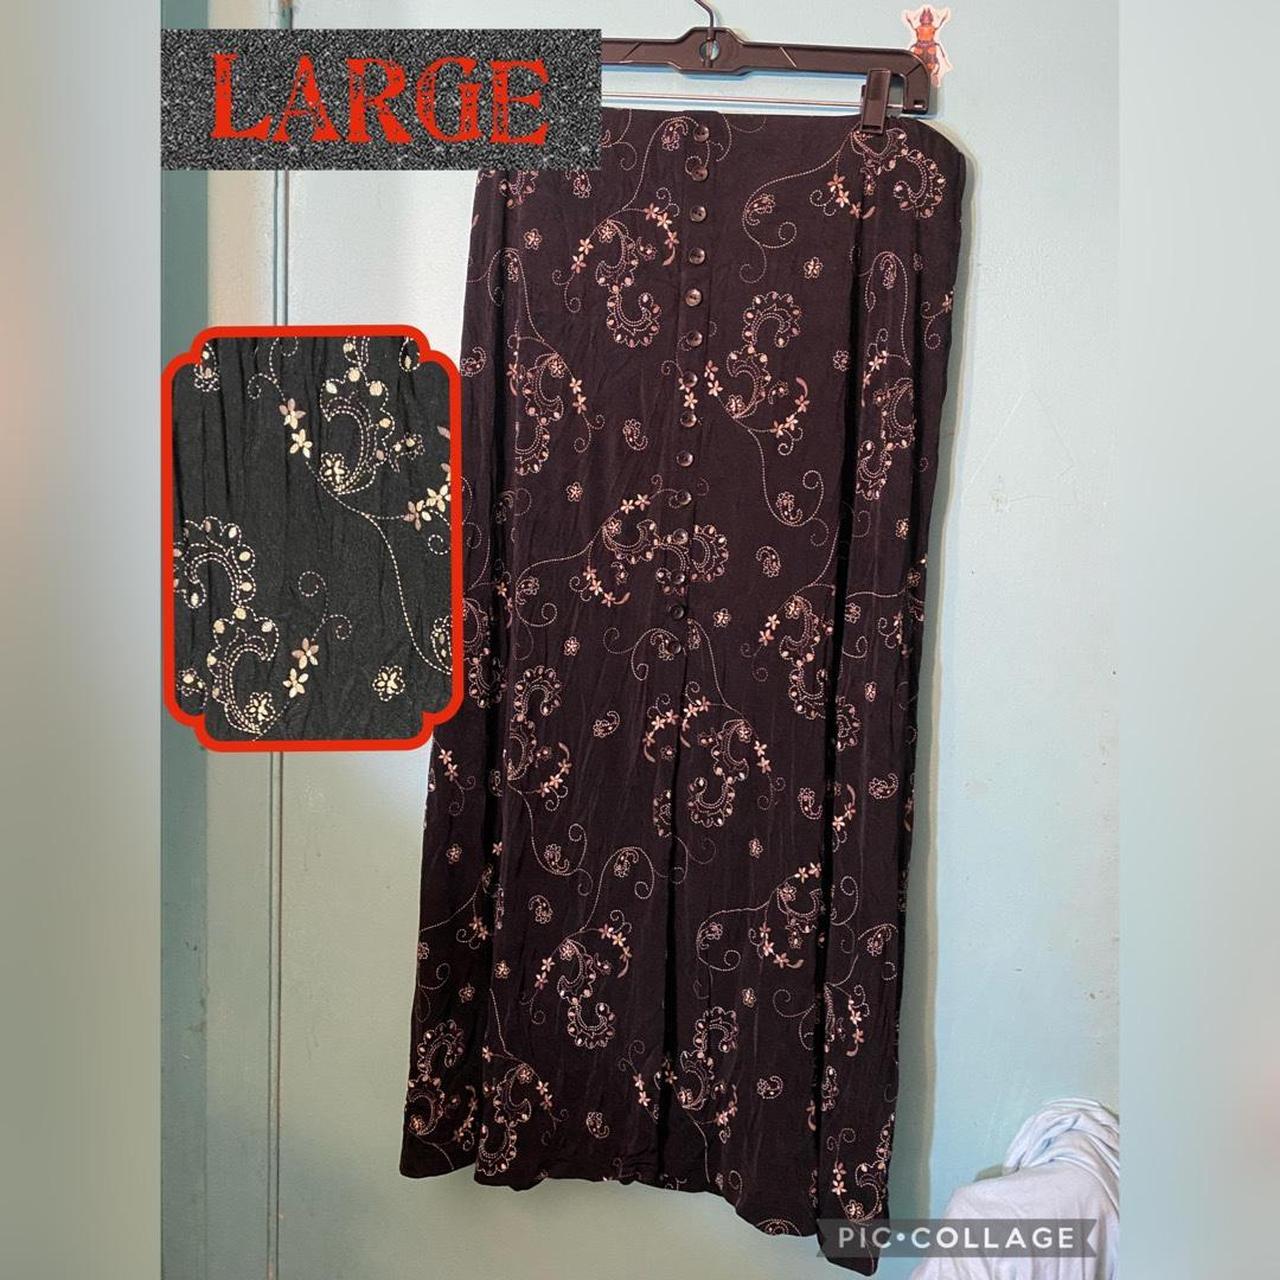 Product Image 1 - Slinky 90’s Maxi Skirt!
Super cute